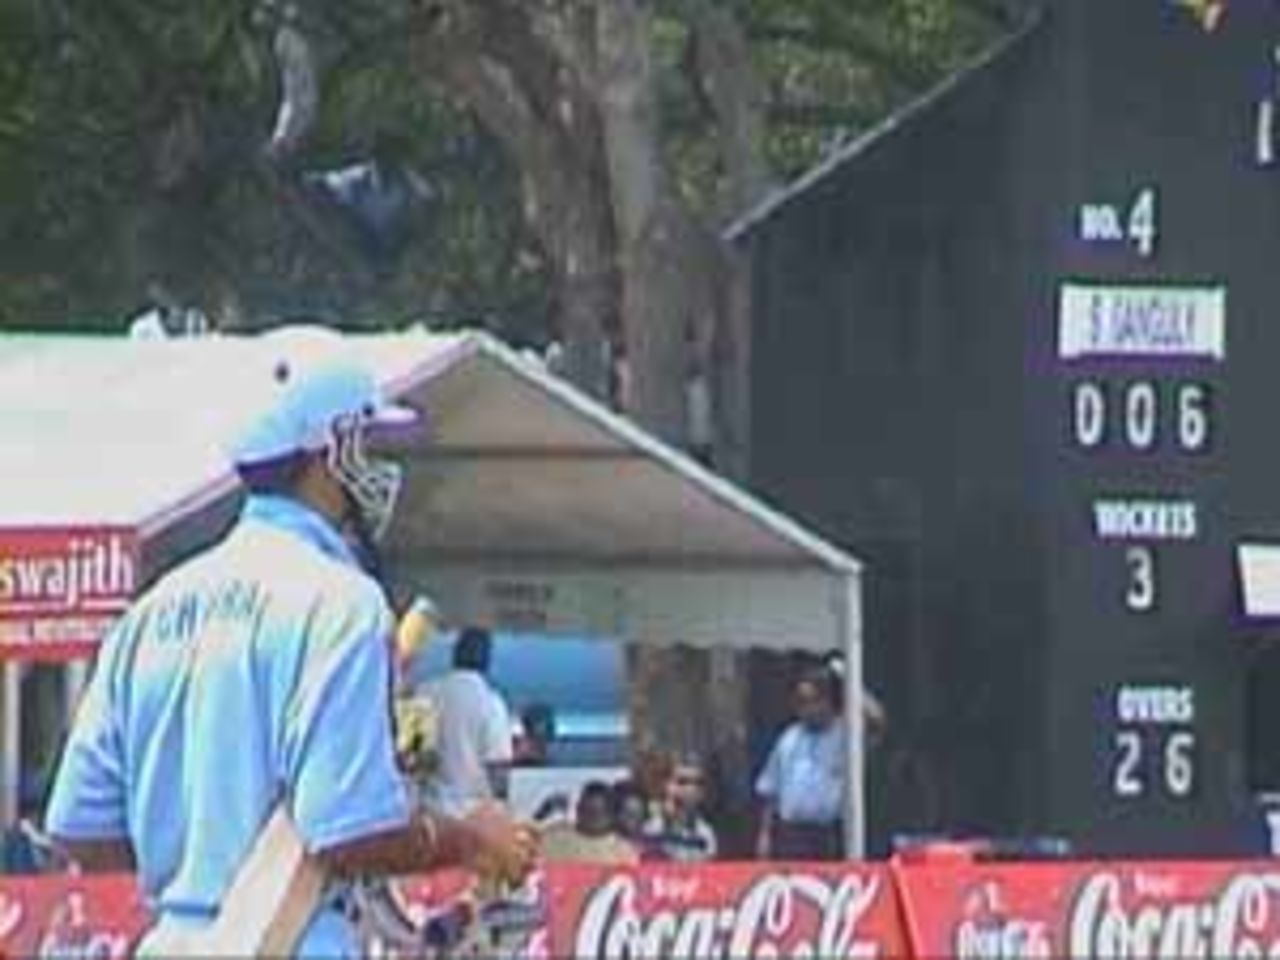 In a surprise move, Chopra is sent in ahead of Robin Singh, India v West Indies (Final), Coca-Cola Singapore Challenge, 1999-2000, Kallang Ground, Singapore, 7 Sep 1999.